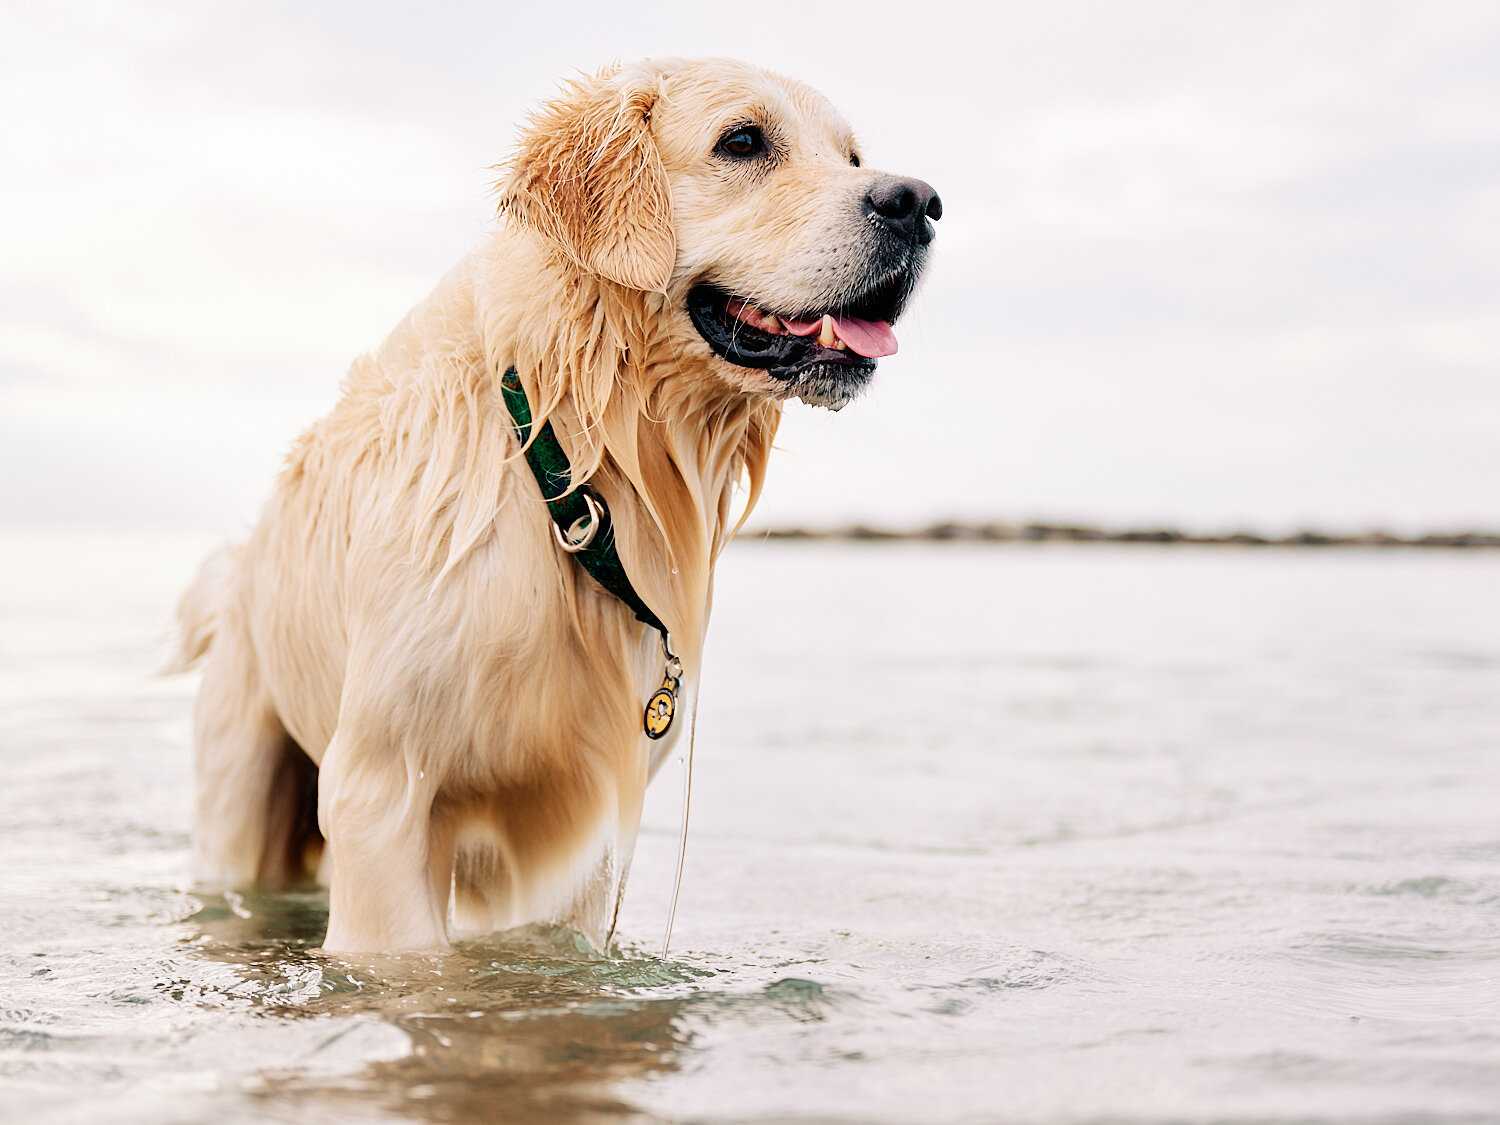  Joyka the Golden Retriever is enjoying time on the beach at Presque Isle State Park on Lake Erie in Western Pennsylvania, USA. The dog loves swimming and splashes joyfully in the waves. 